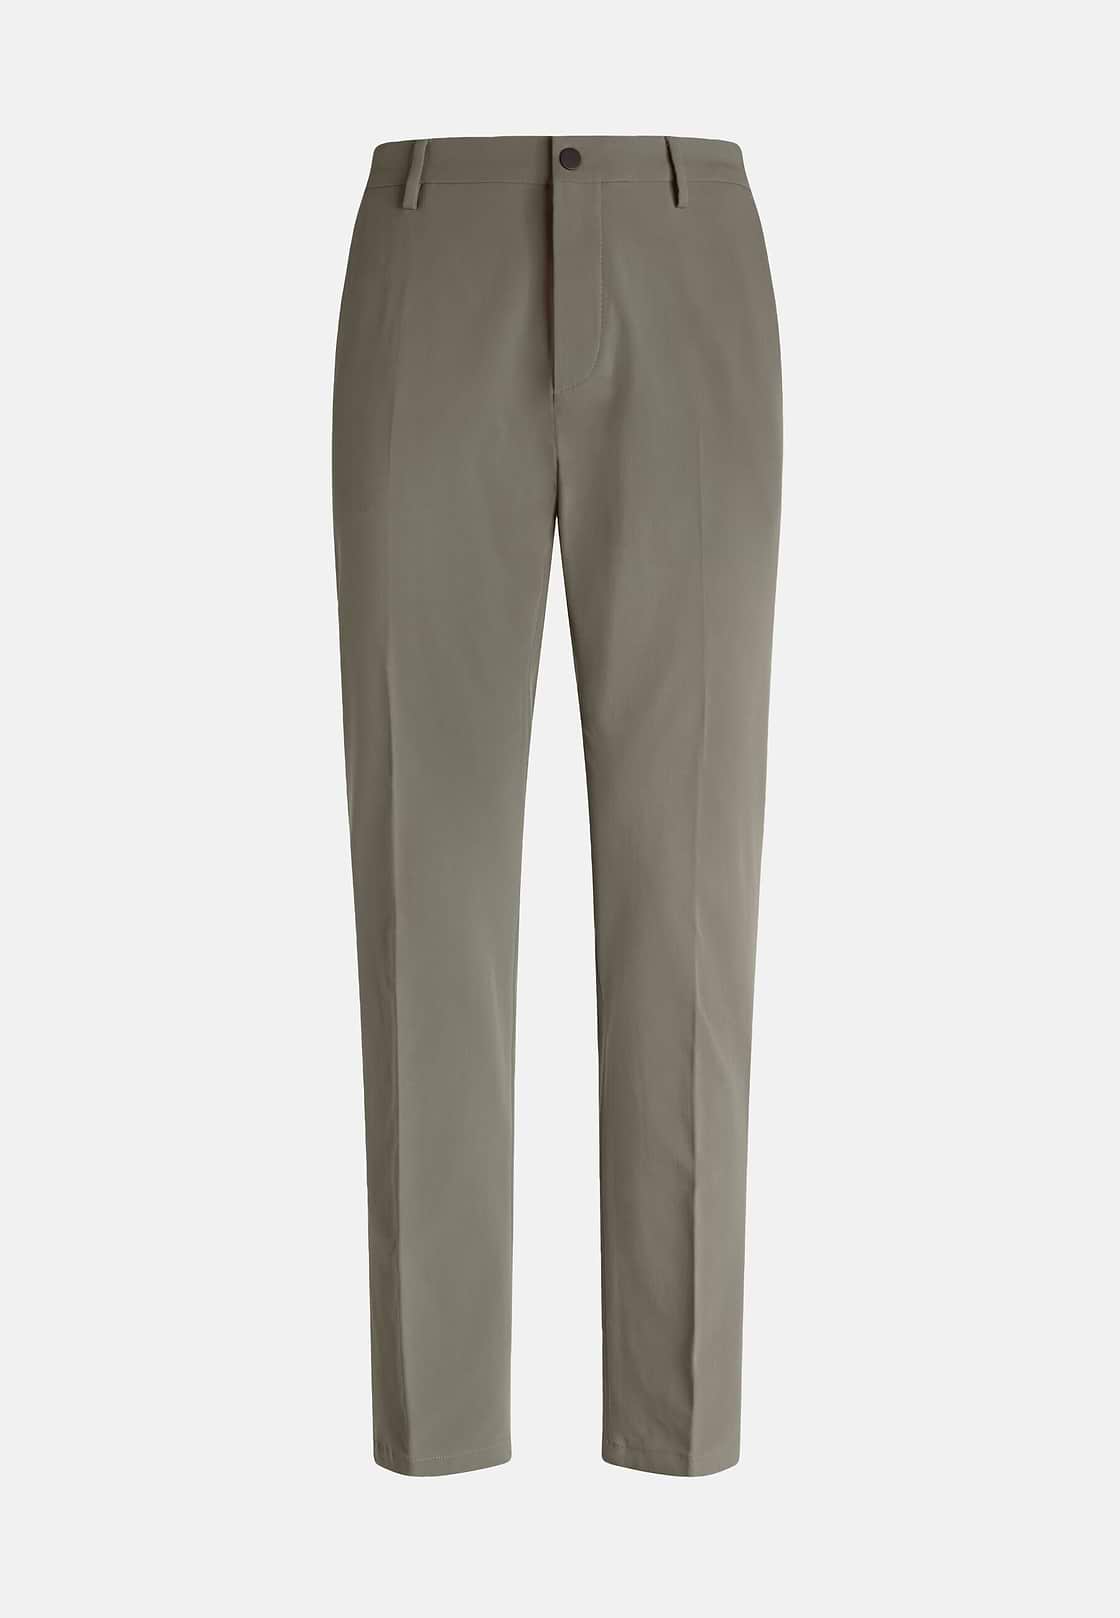 BTech Performance Stretch Nylon Pants, Taupe, hi-res